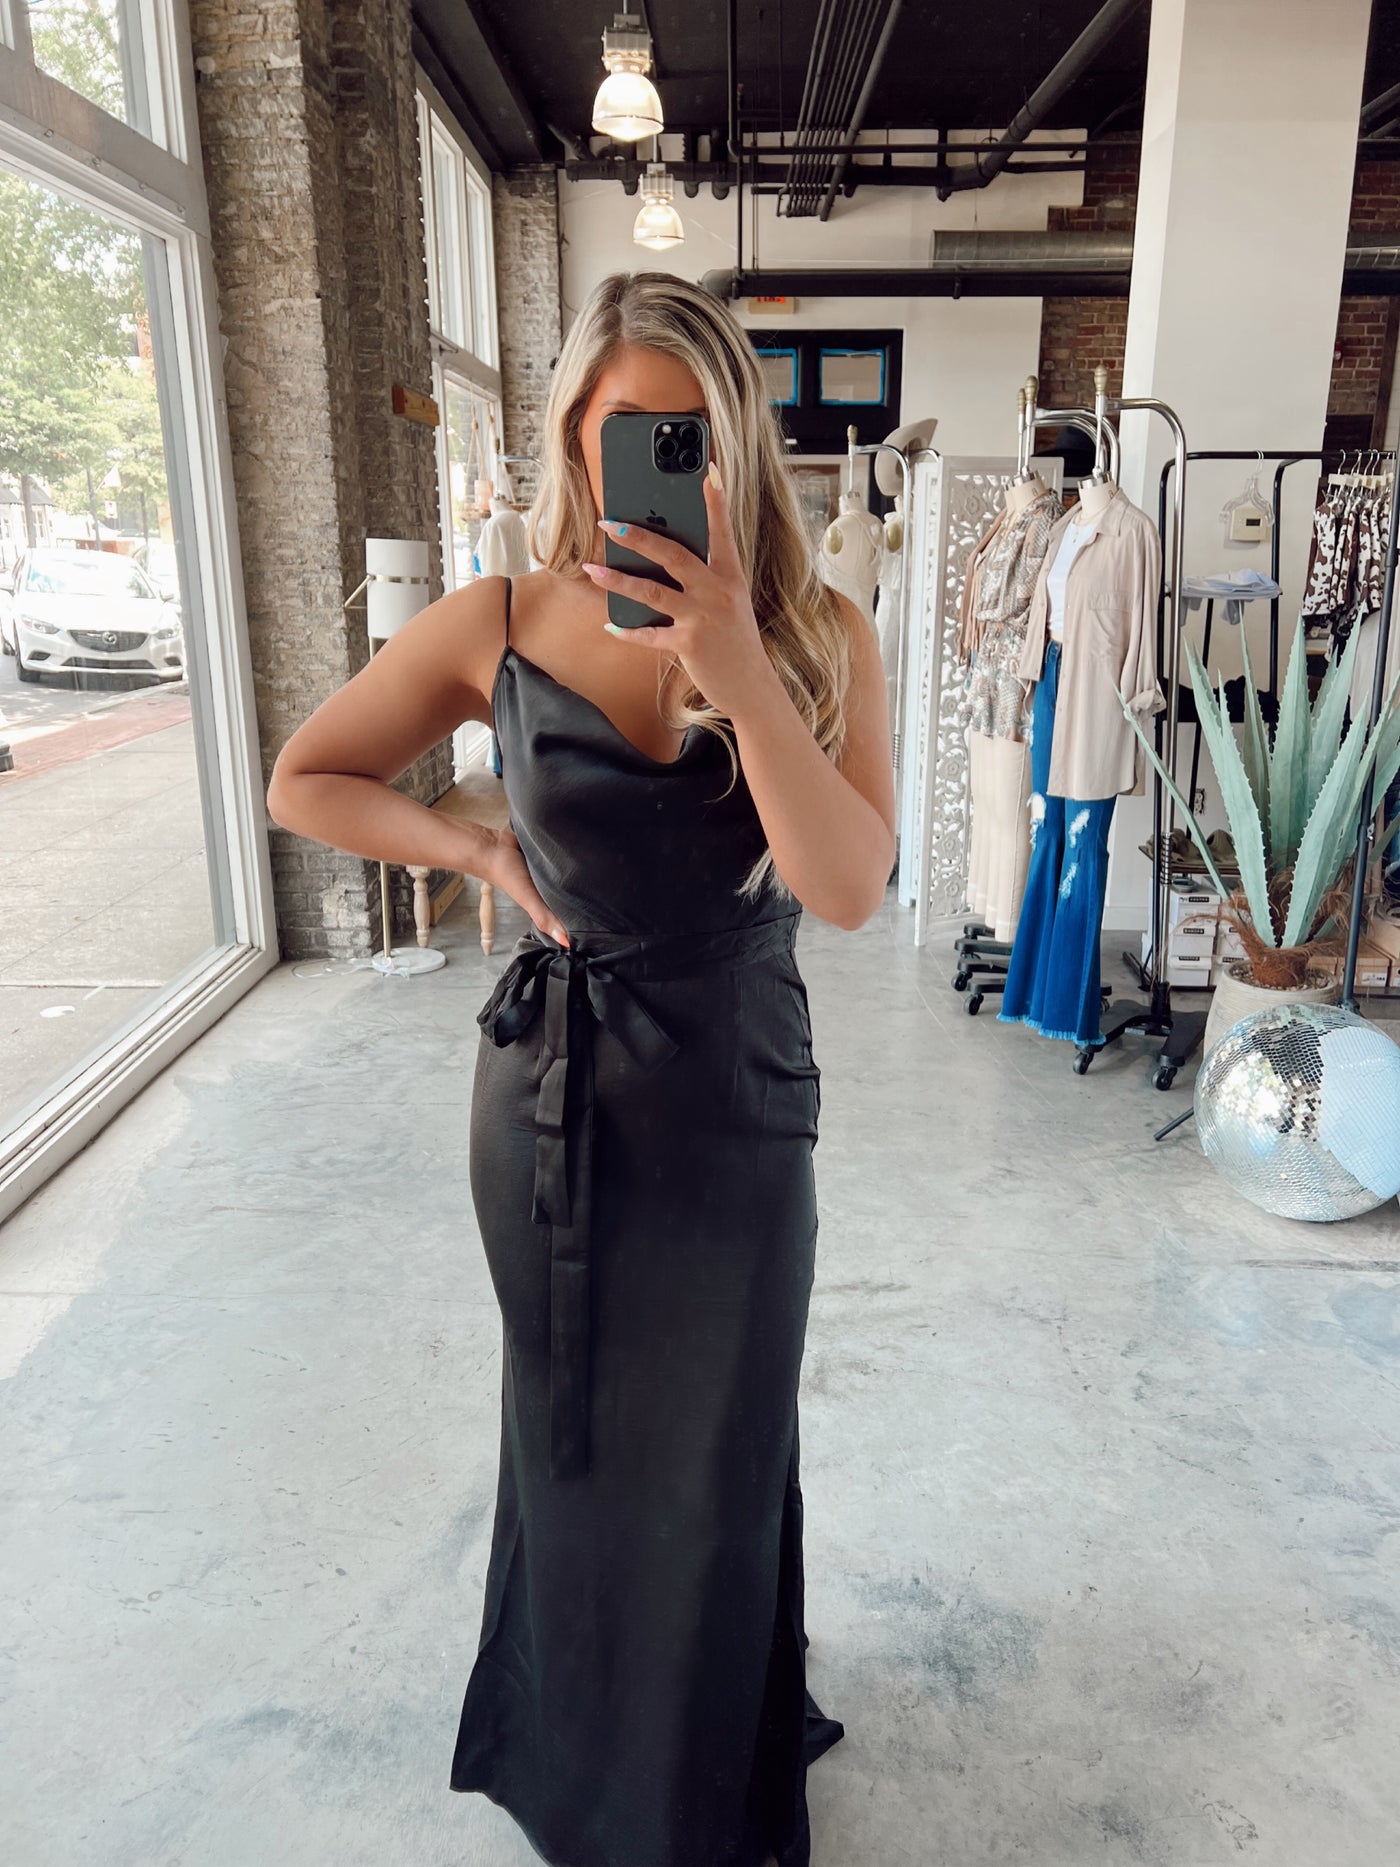 Sway With Me Satin Maxi Dress FINAL SALE